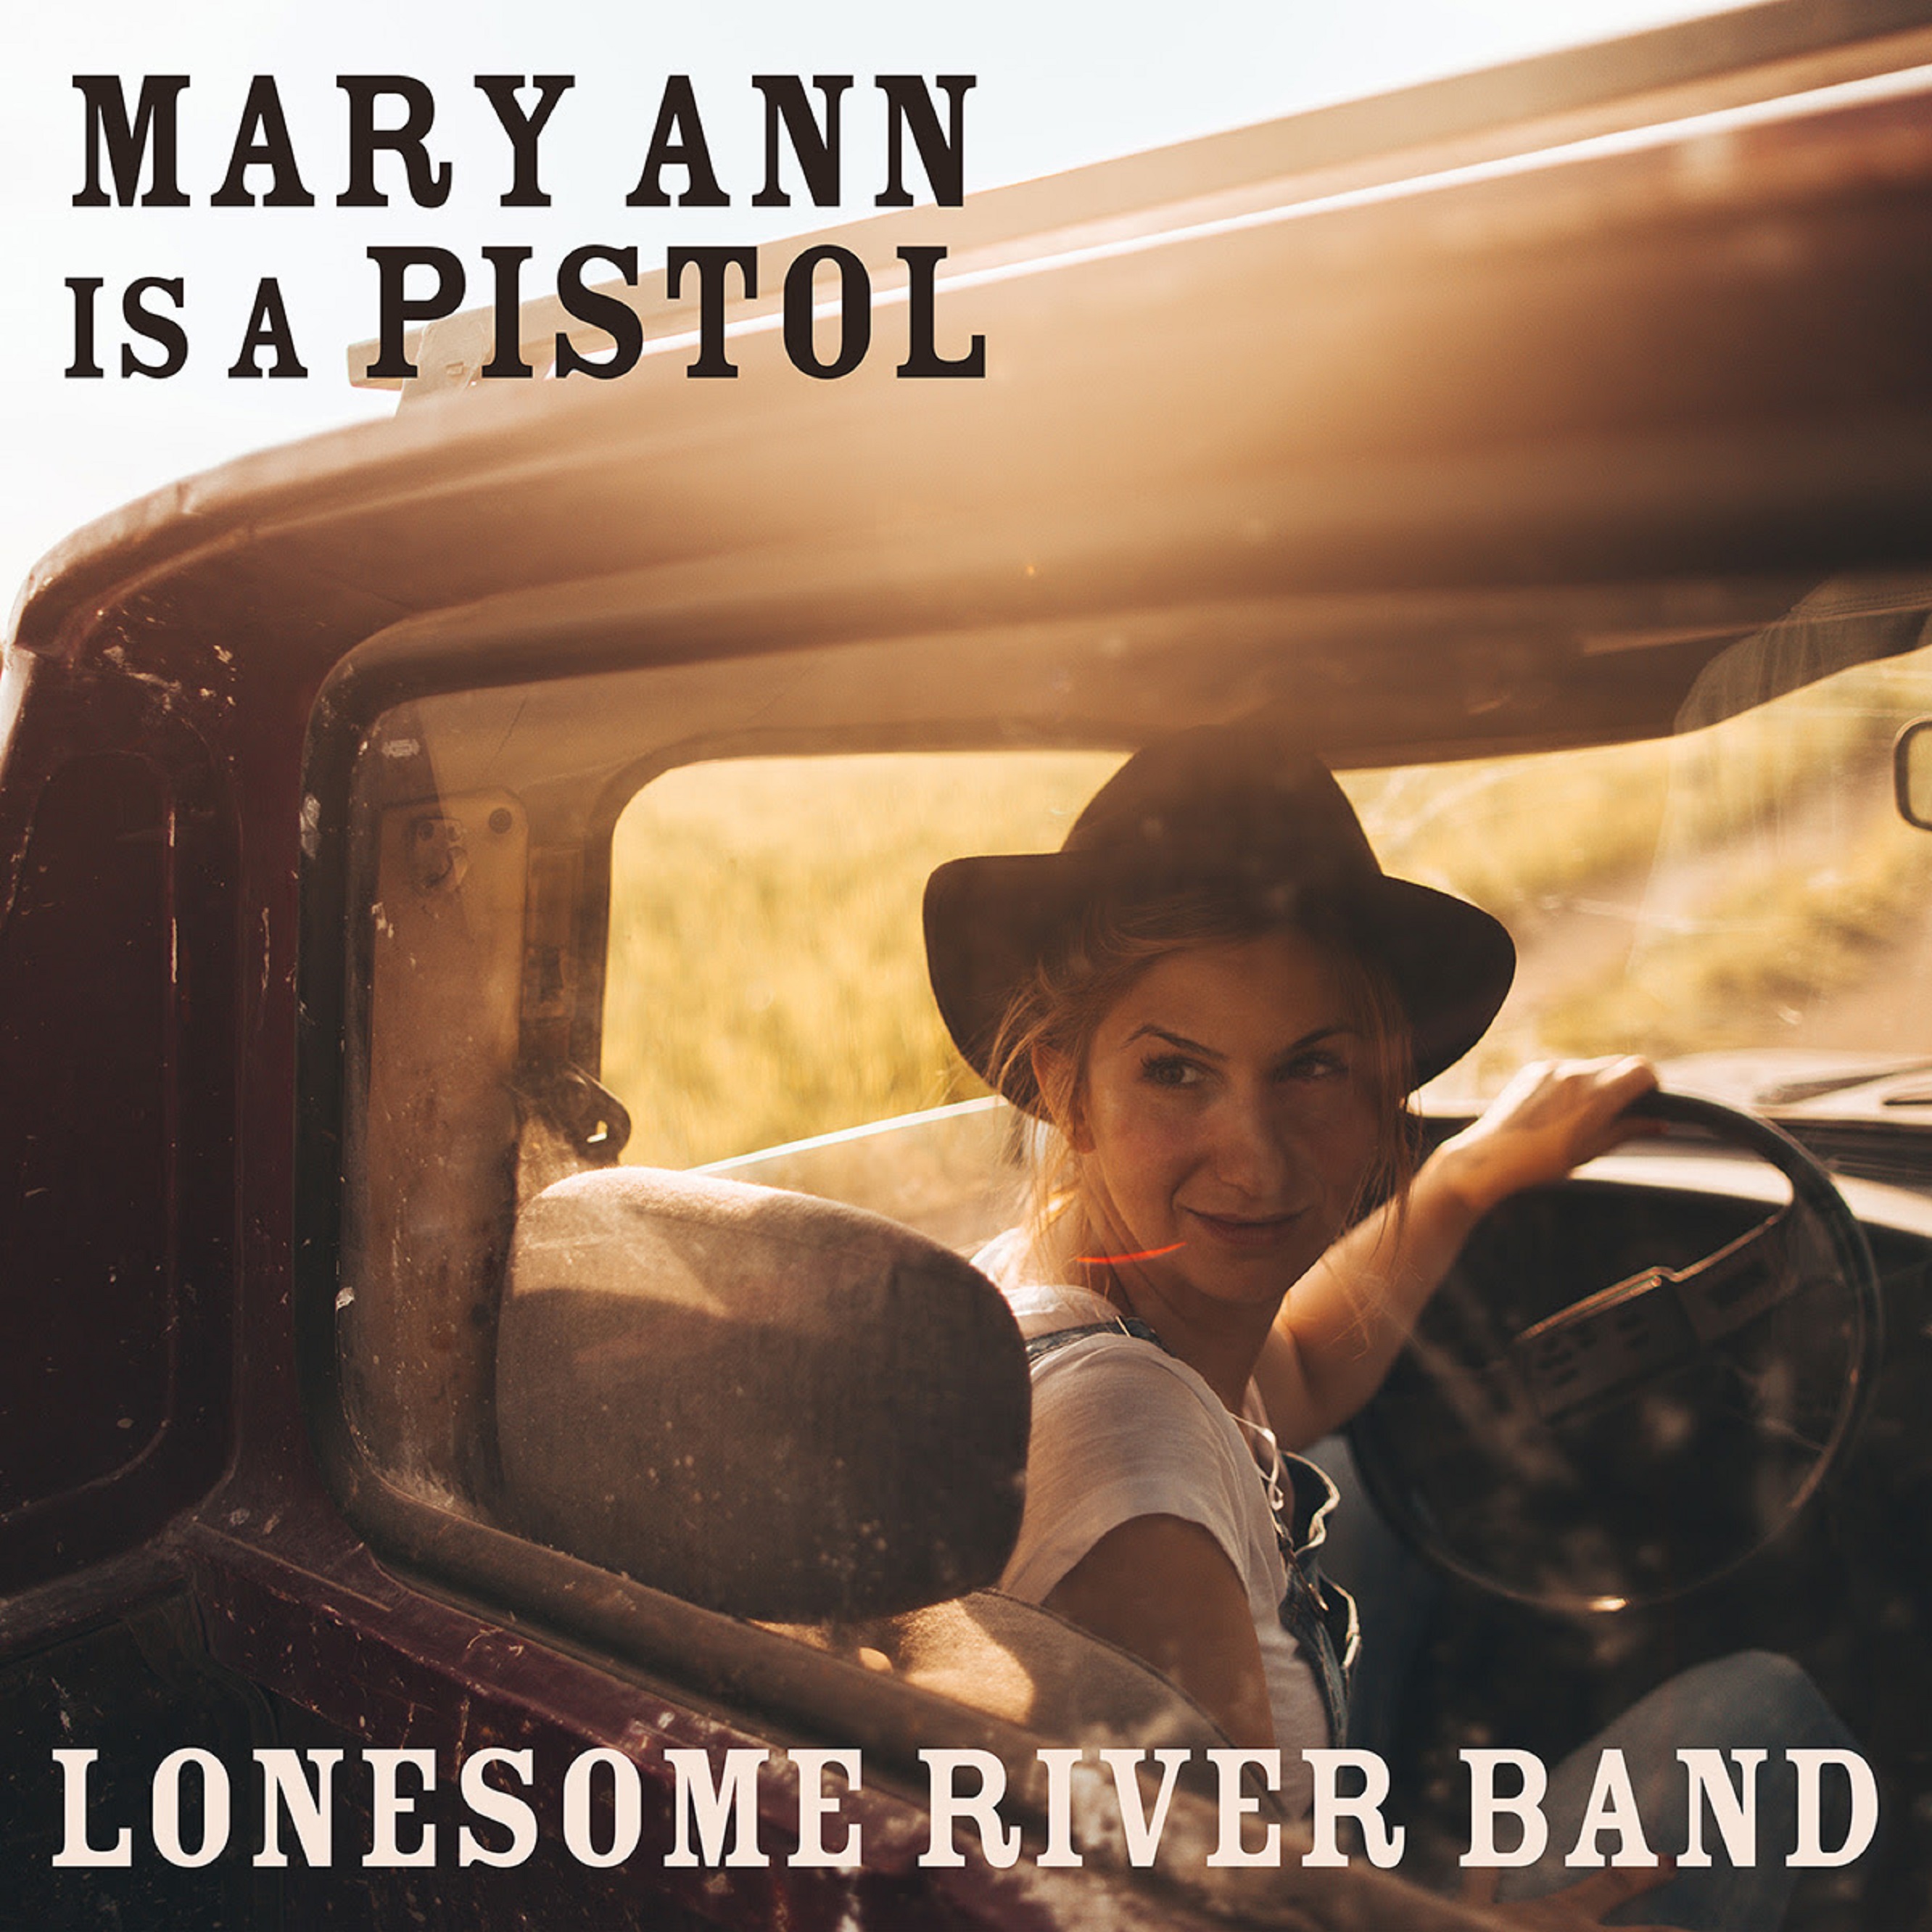 Lonesome River Band's “Mary Ann Is A Pistol” reaches No. 1 on Bluegrass Today chart